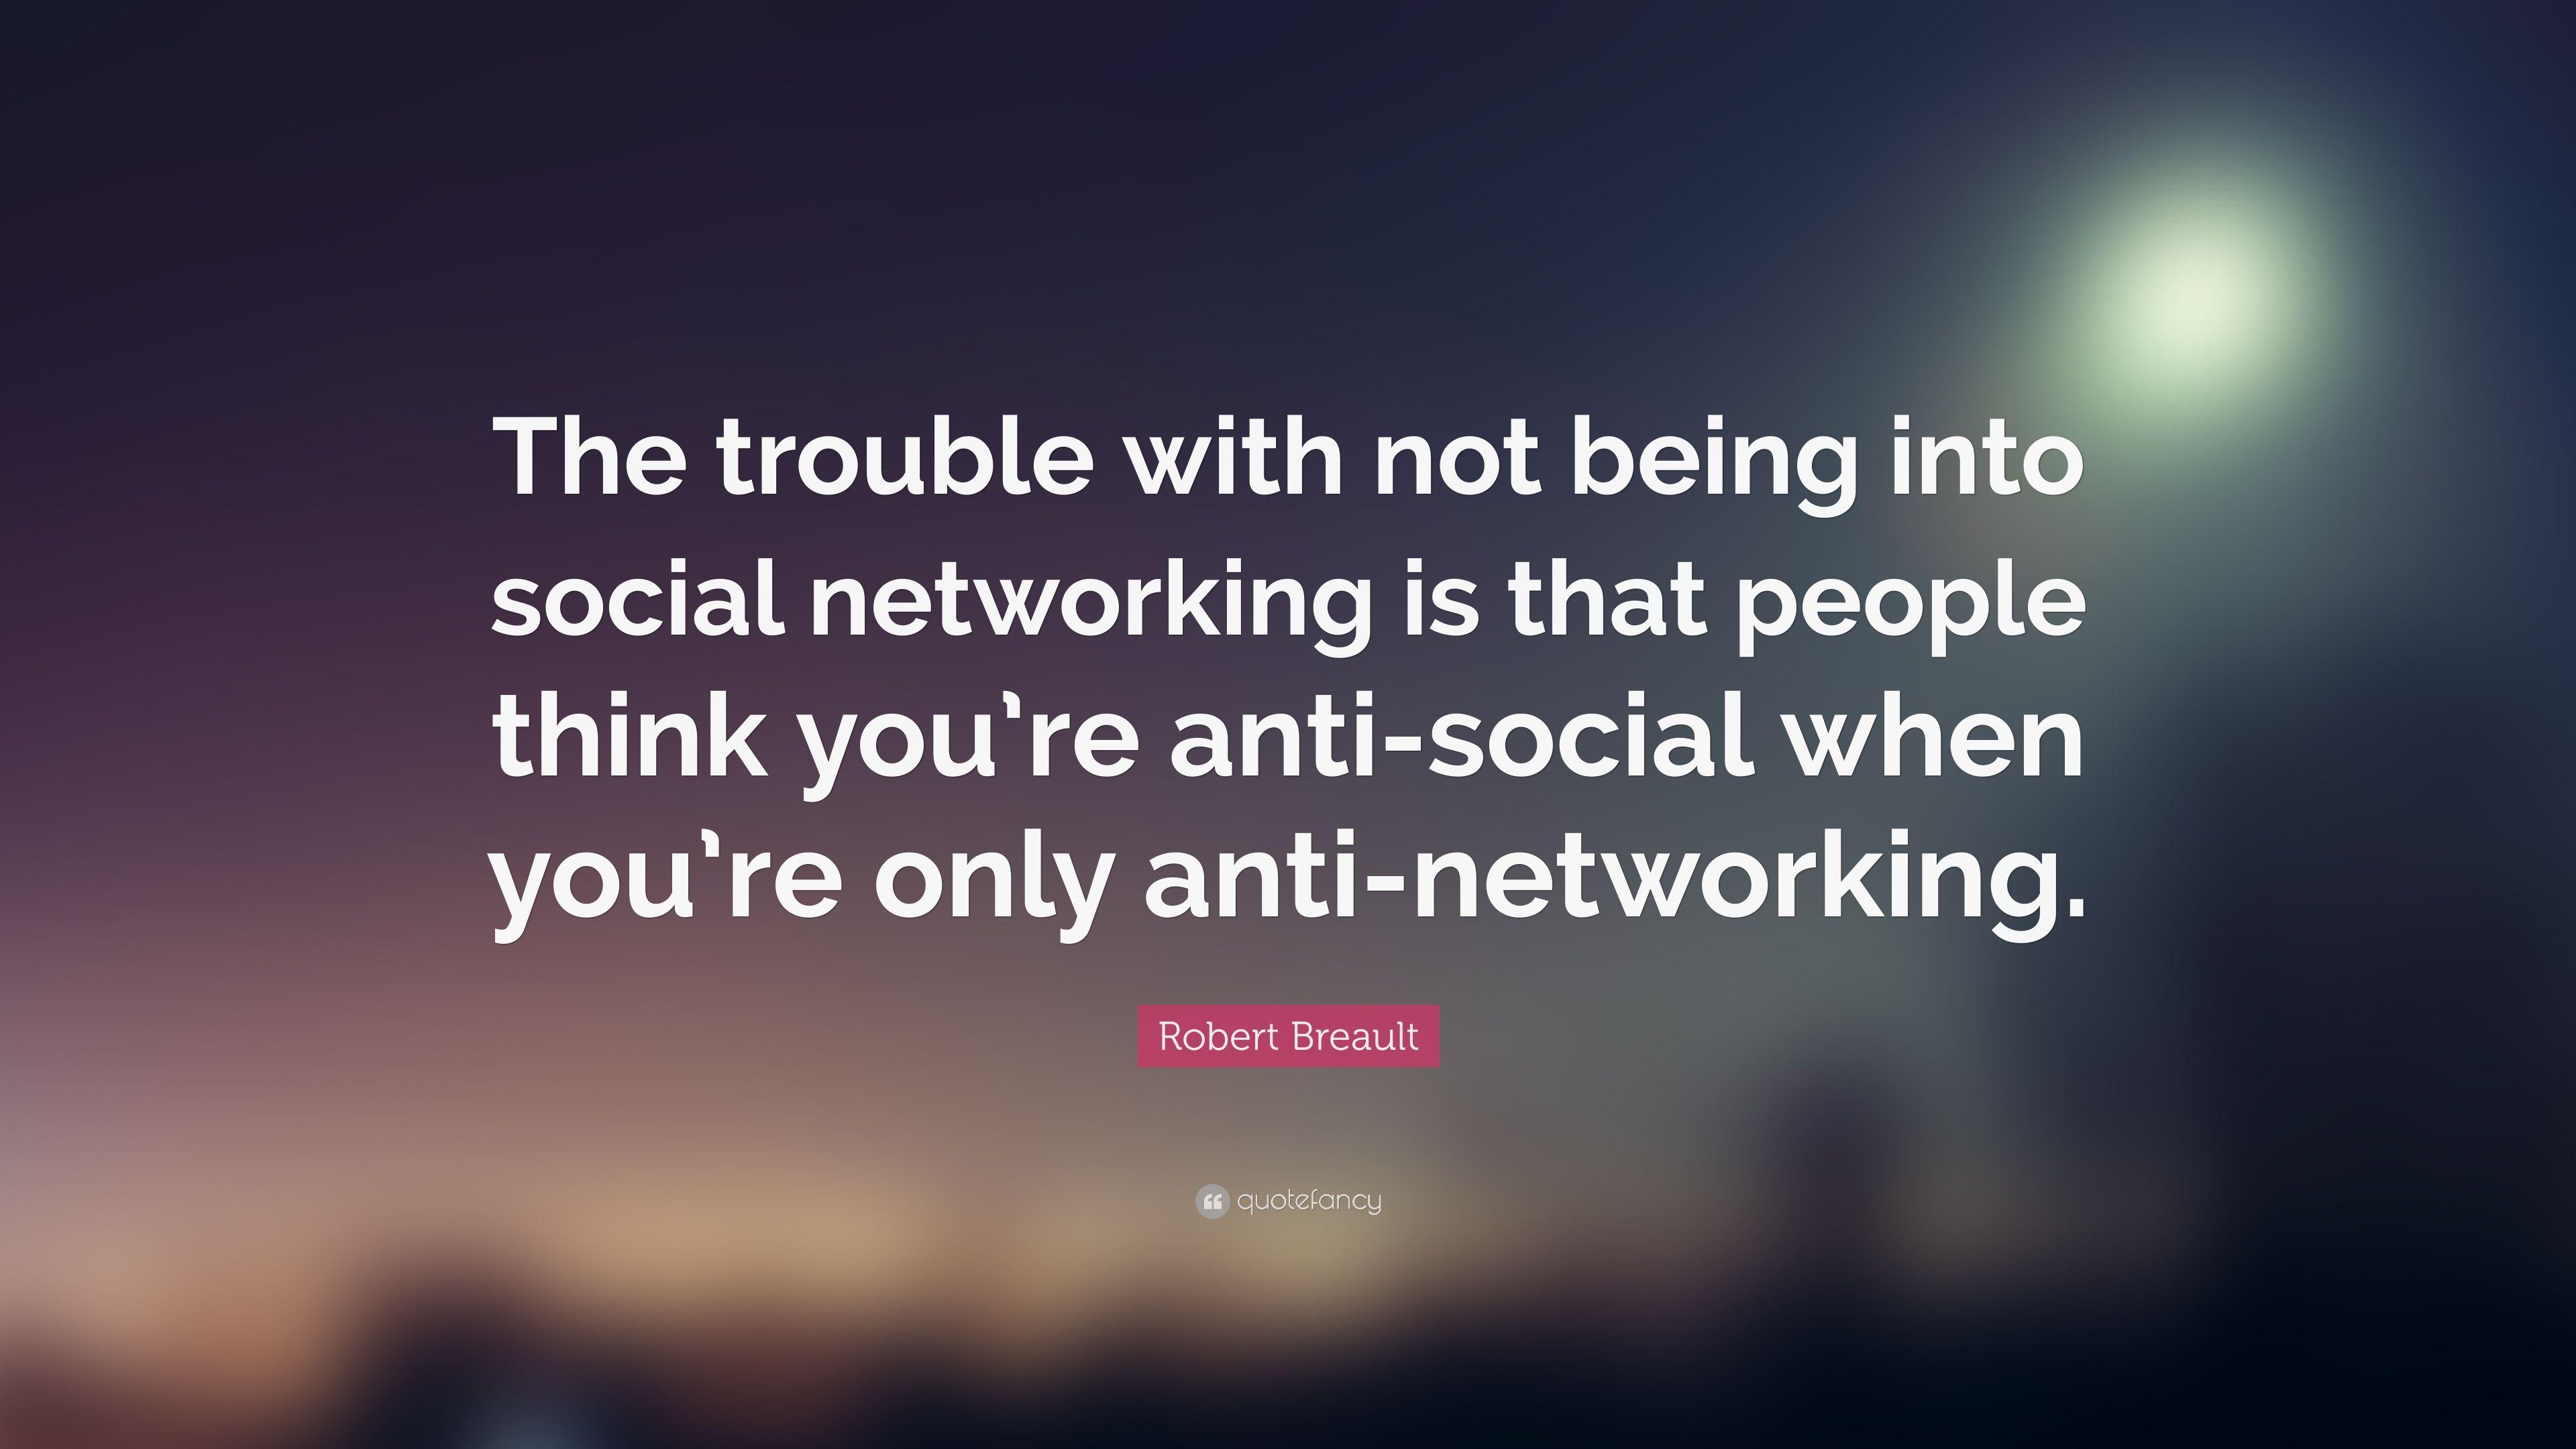 Robert Breault Quote: “The trouble with not being into social